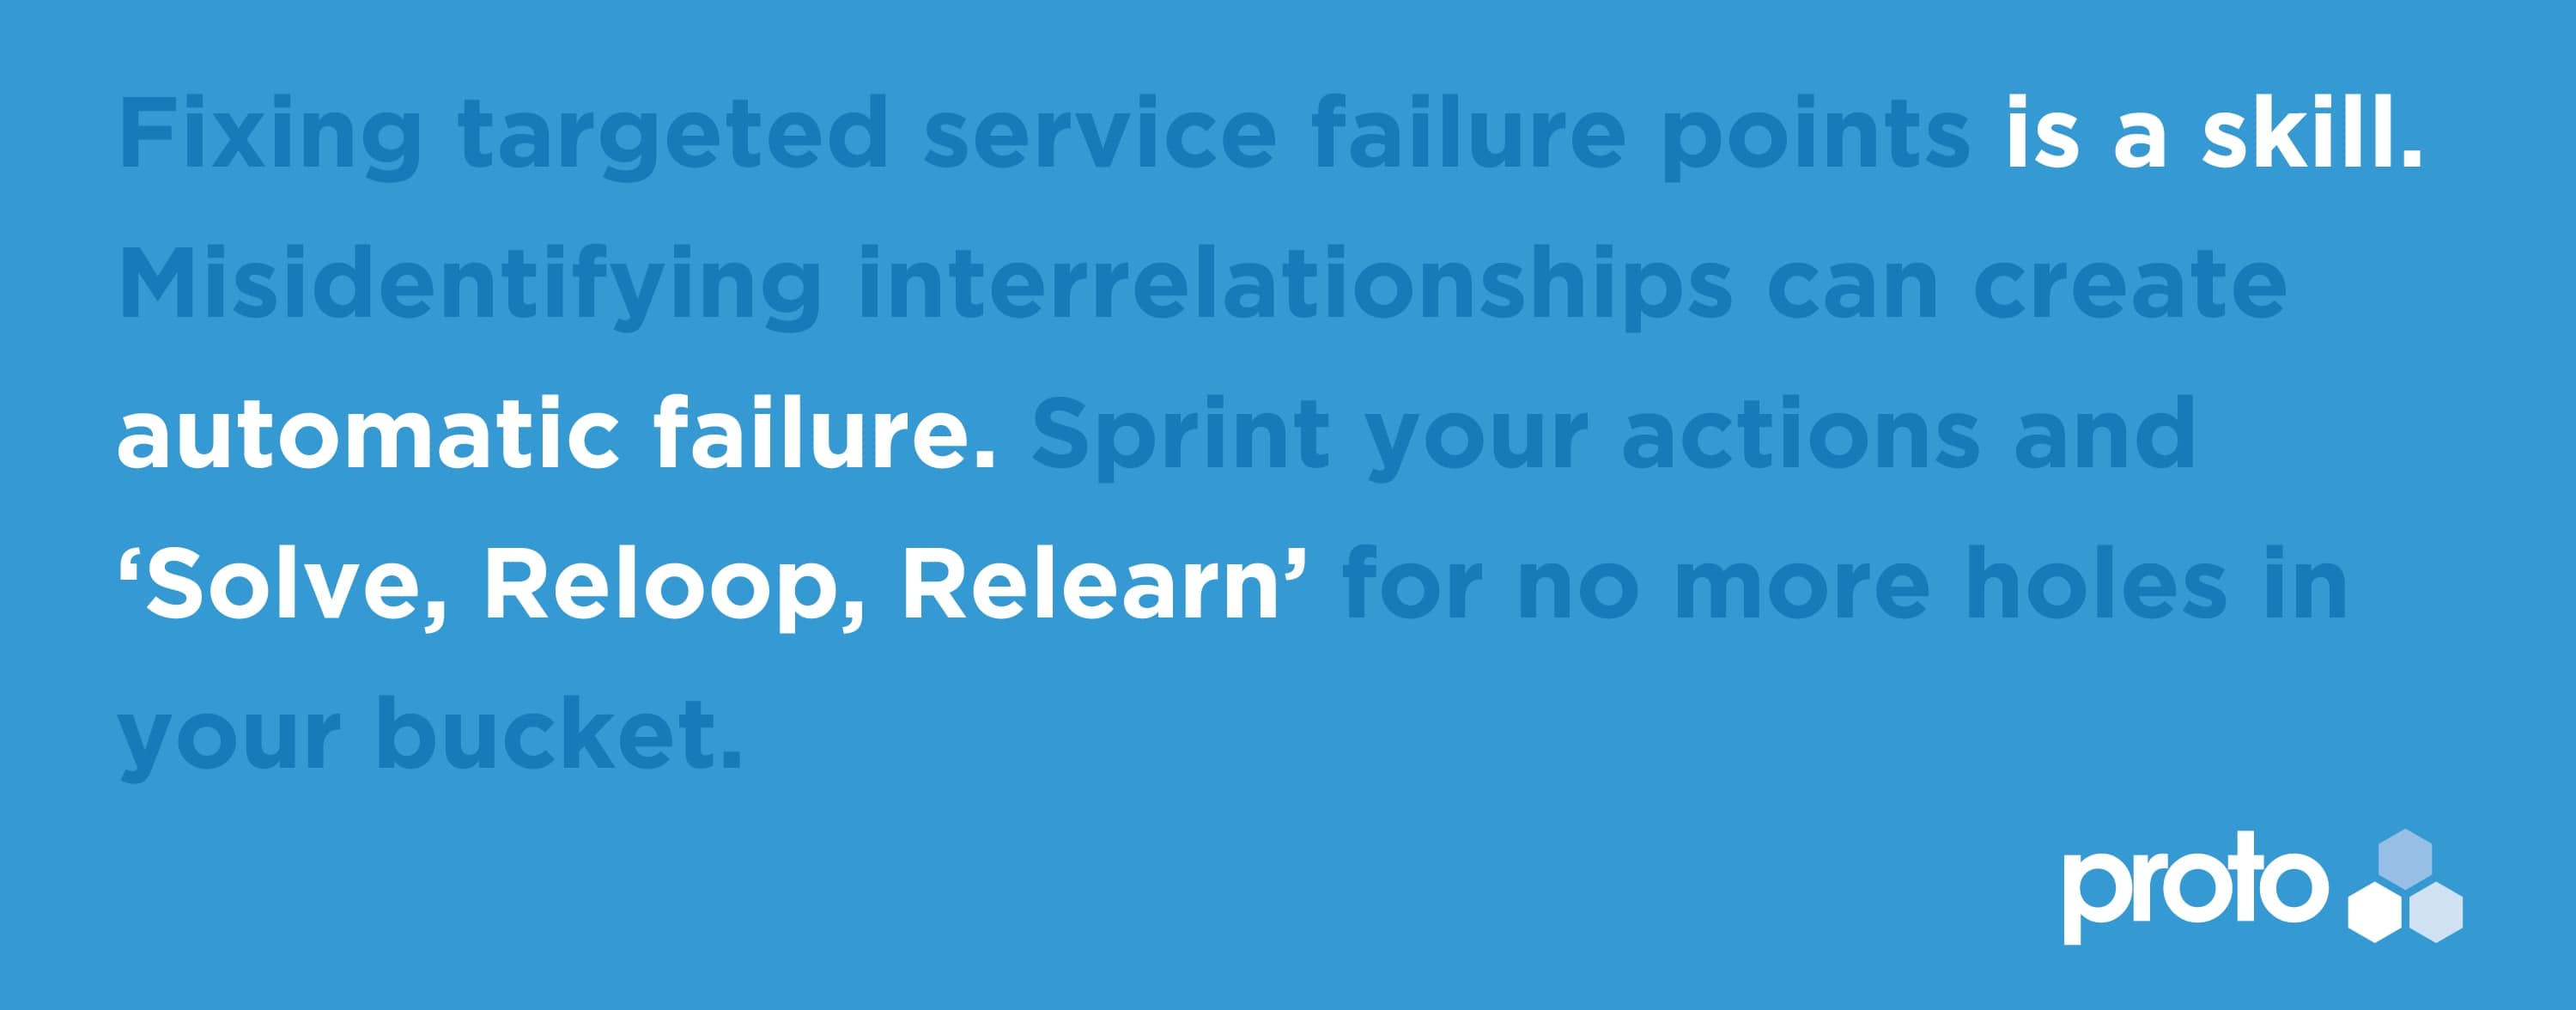 Fixing targeted service failure points is a skill. Misidentifying interrelationships can create
automatic failure. Sprint your actions and ‘Solve, Reloop, Relearn’ for no more holes in your bucket.